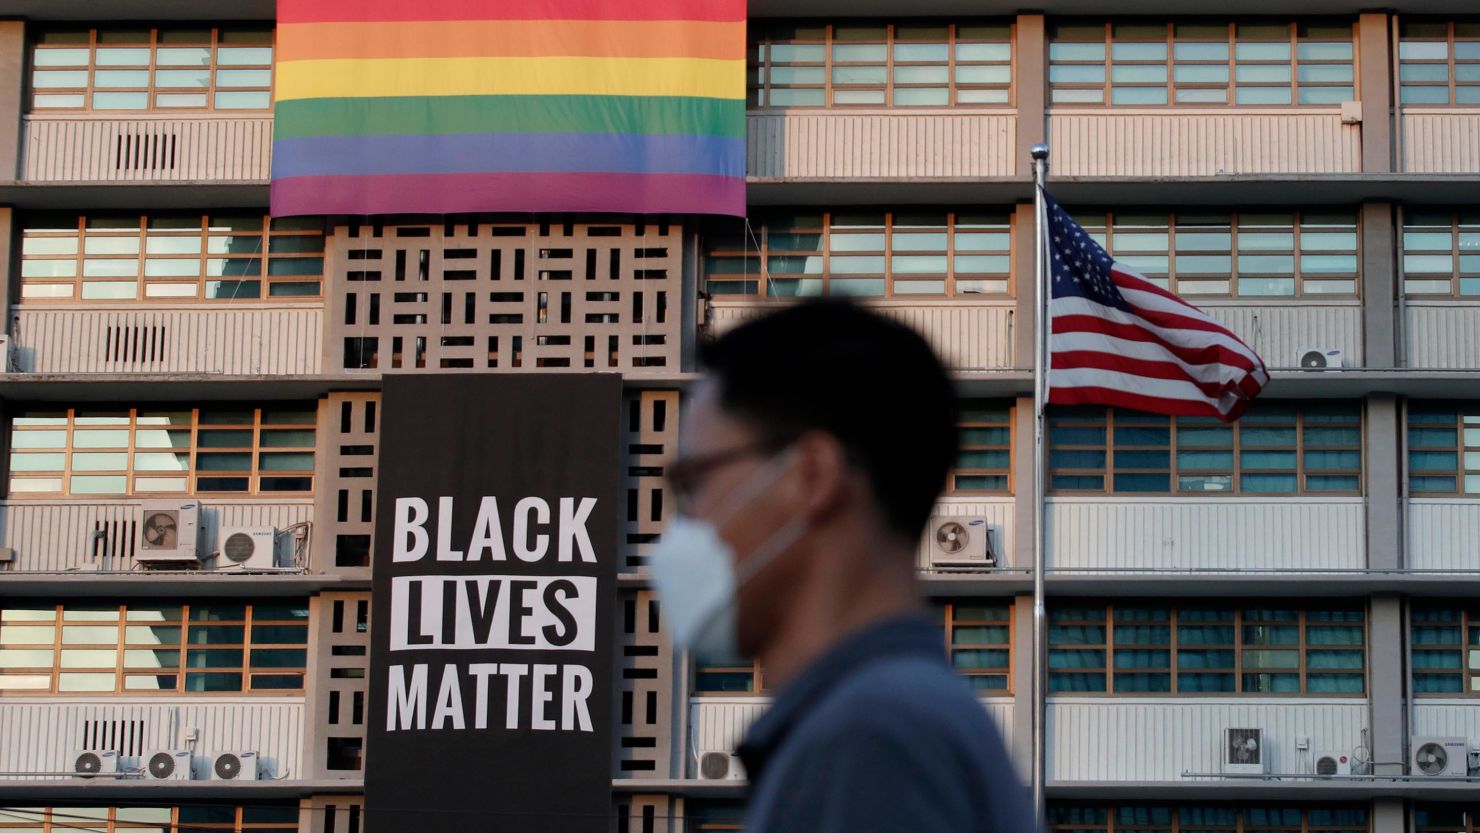 The US Embassy in Seoul, South Korea, removed a large banner for the Black Lives Matter movement and a rainbow flag that celebrates LGBTQ pride after a request from State Department leadership in June 2020.